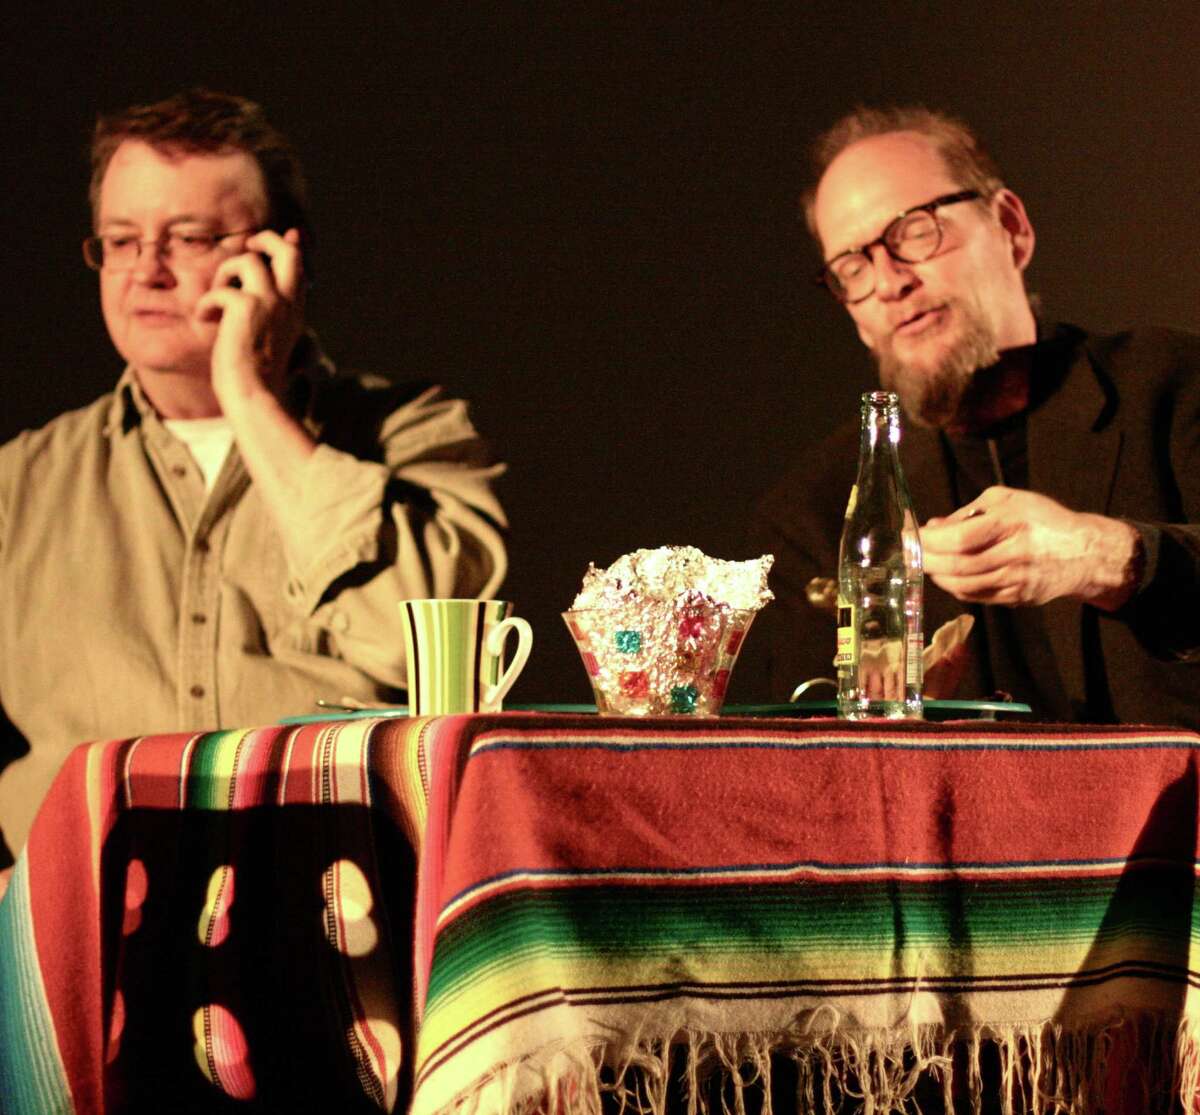 Chuck Squier (left) and Erik Bosse appear in the funny yet wistful “Tales of Lost Southtown.”